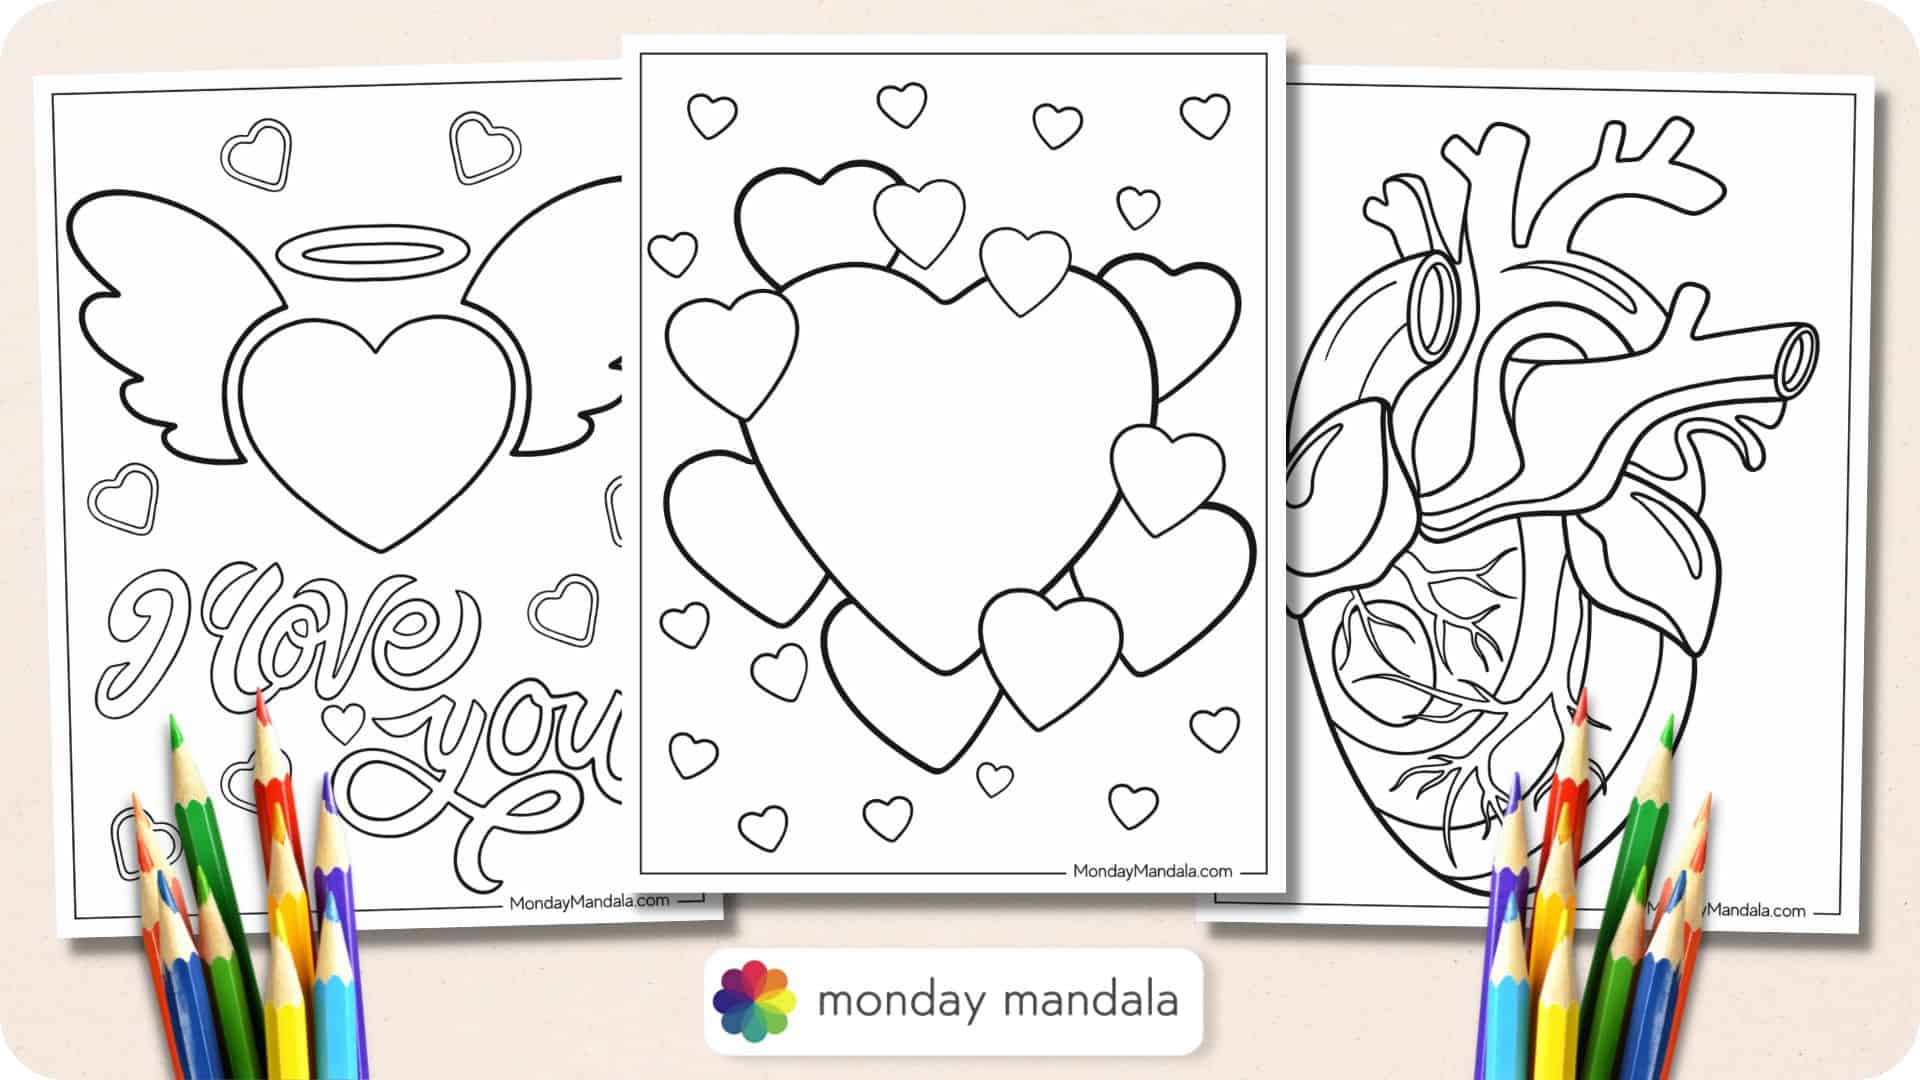 Heart coloring pages free pdf printables